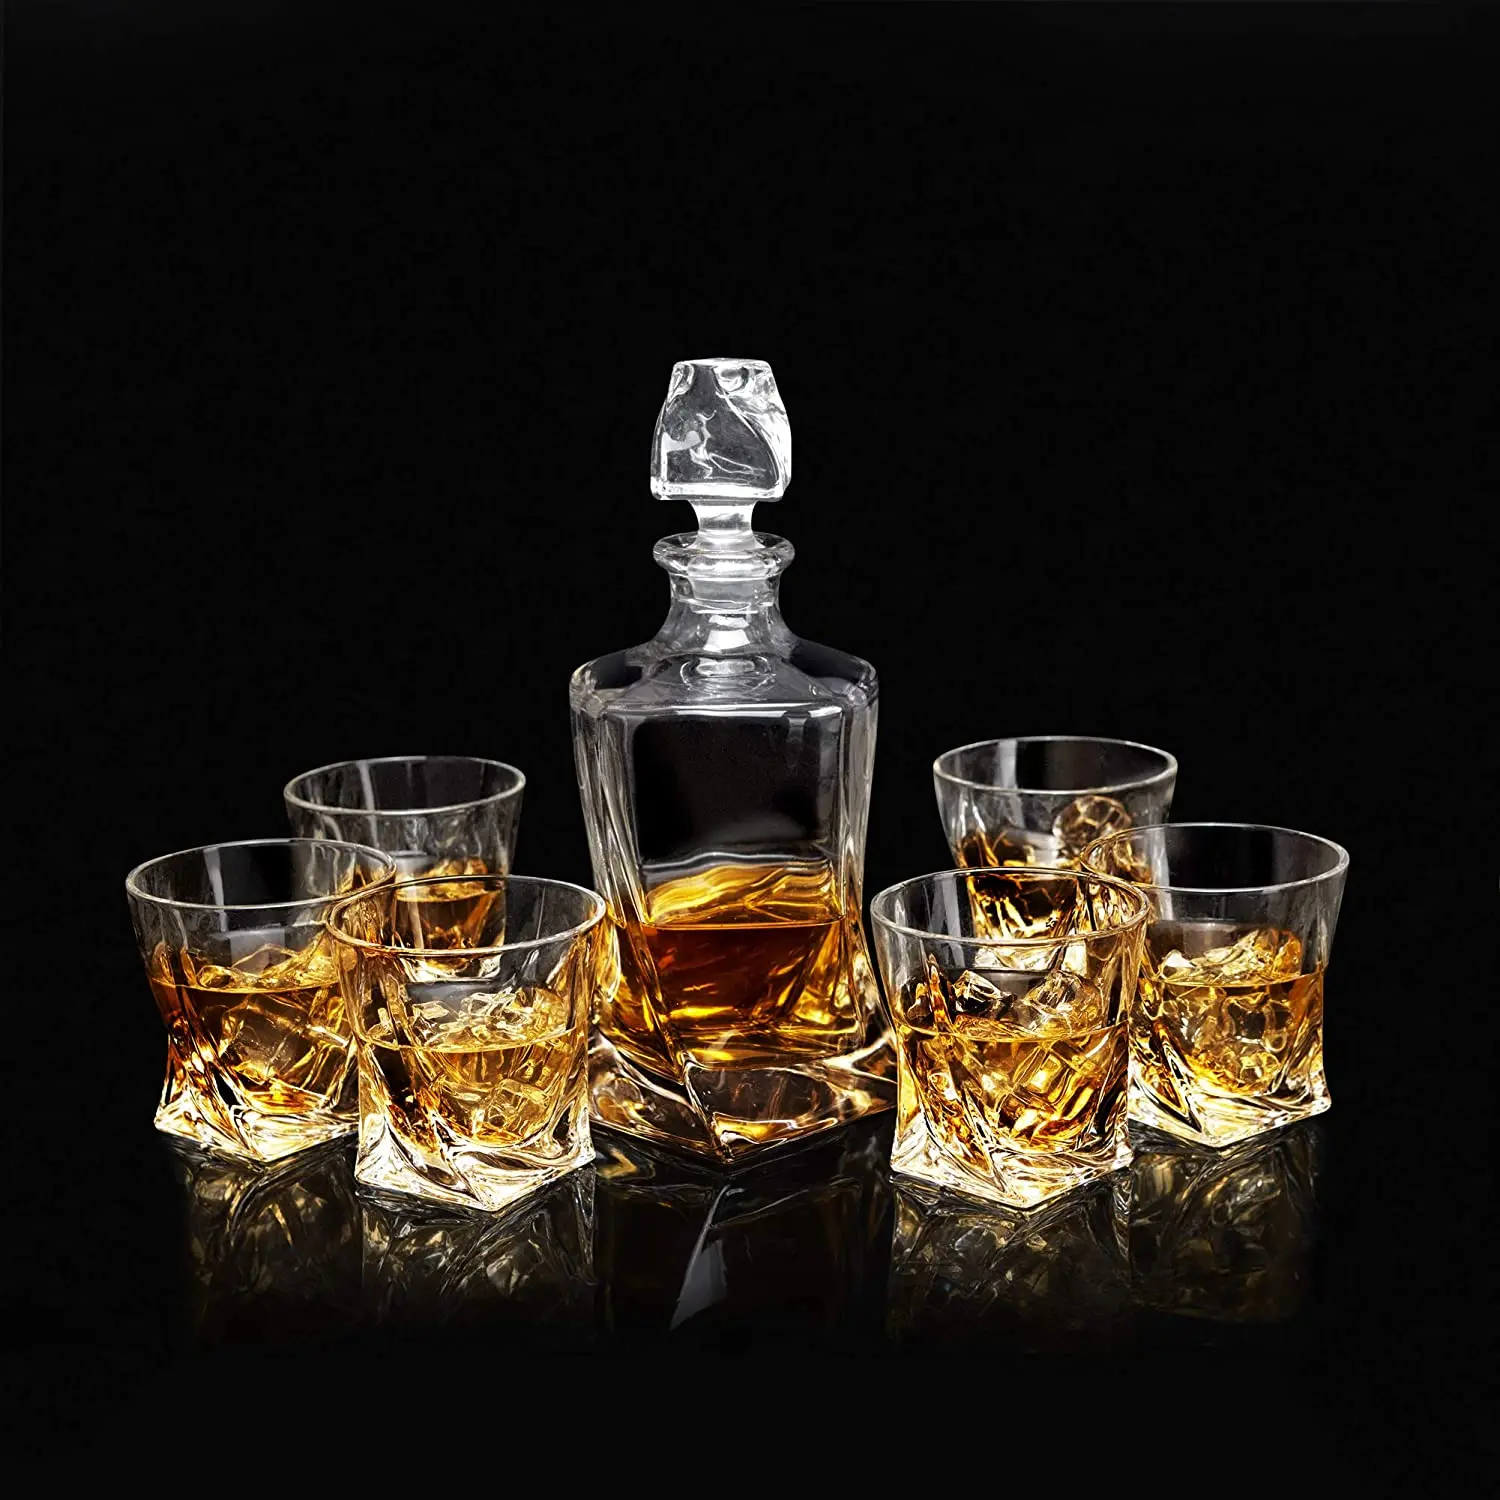 Whisky LANFULA Hand Made Liquor Decanter With 4 Bourbon Glasses In Gift Box Brandy or Vodka 5-Piece Crystal Whiskey Decanter Set Premium Whiskey Glasses Set for Scotch 